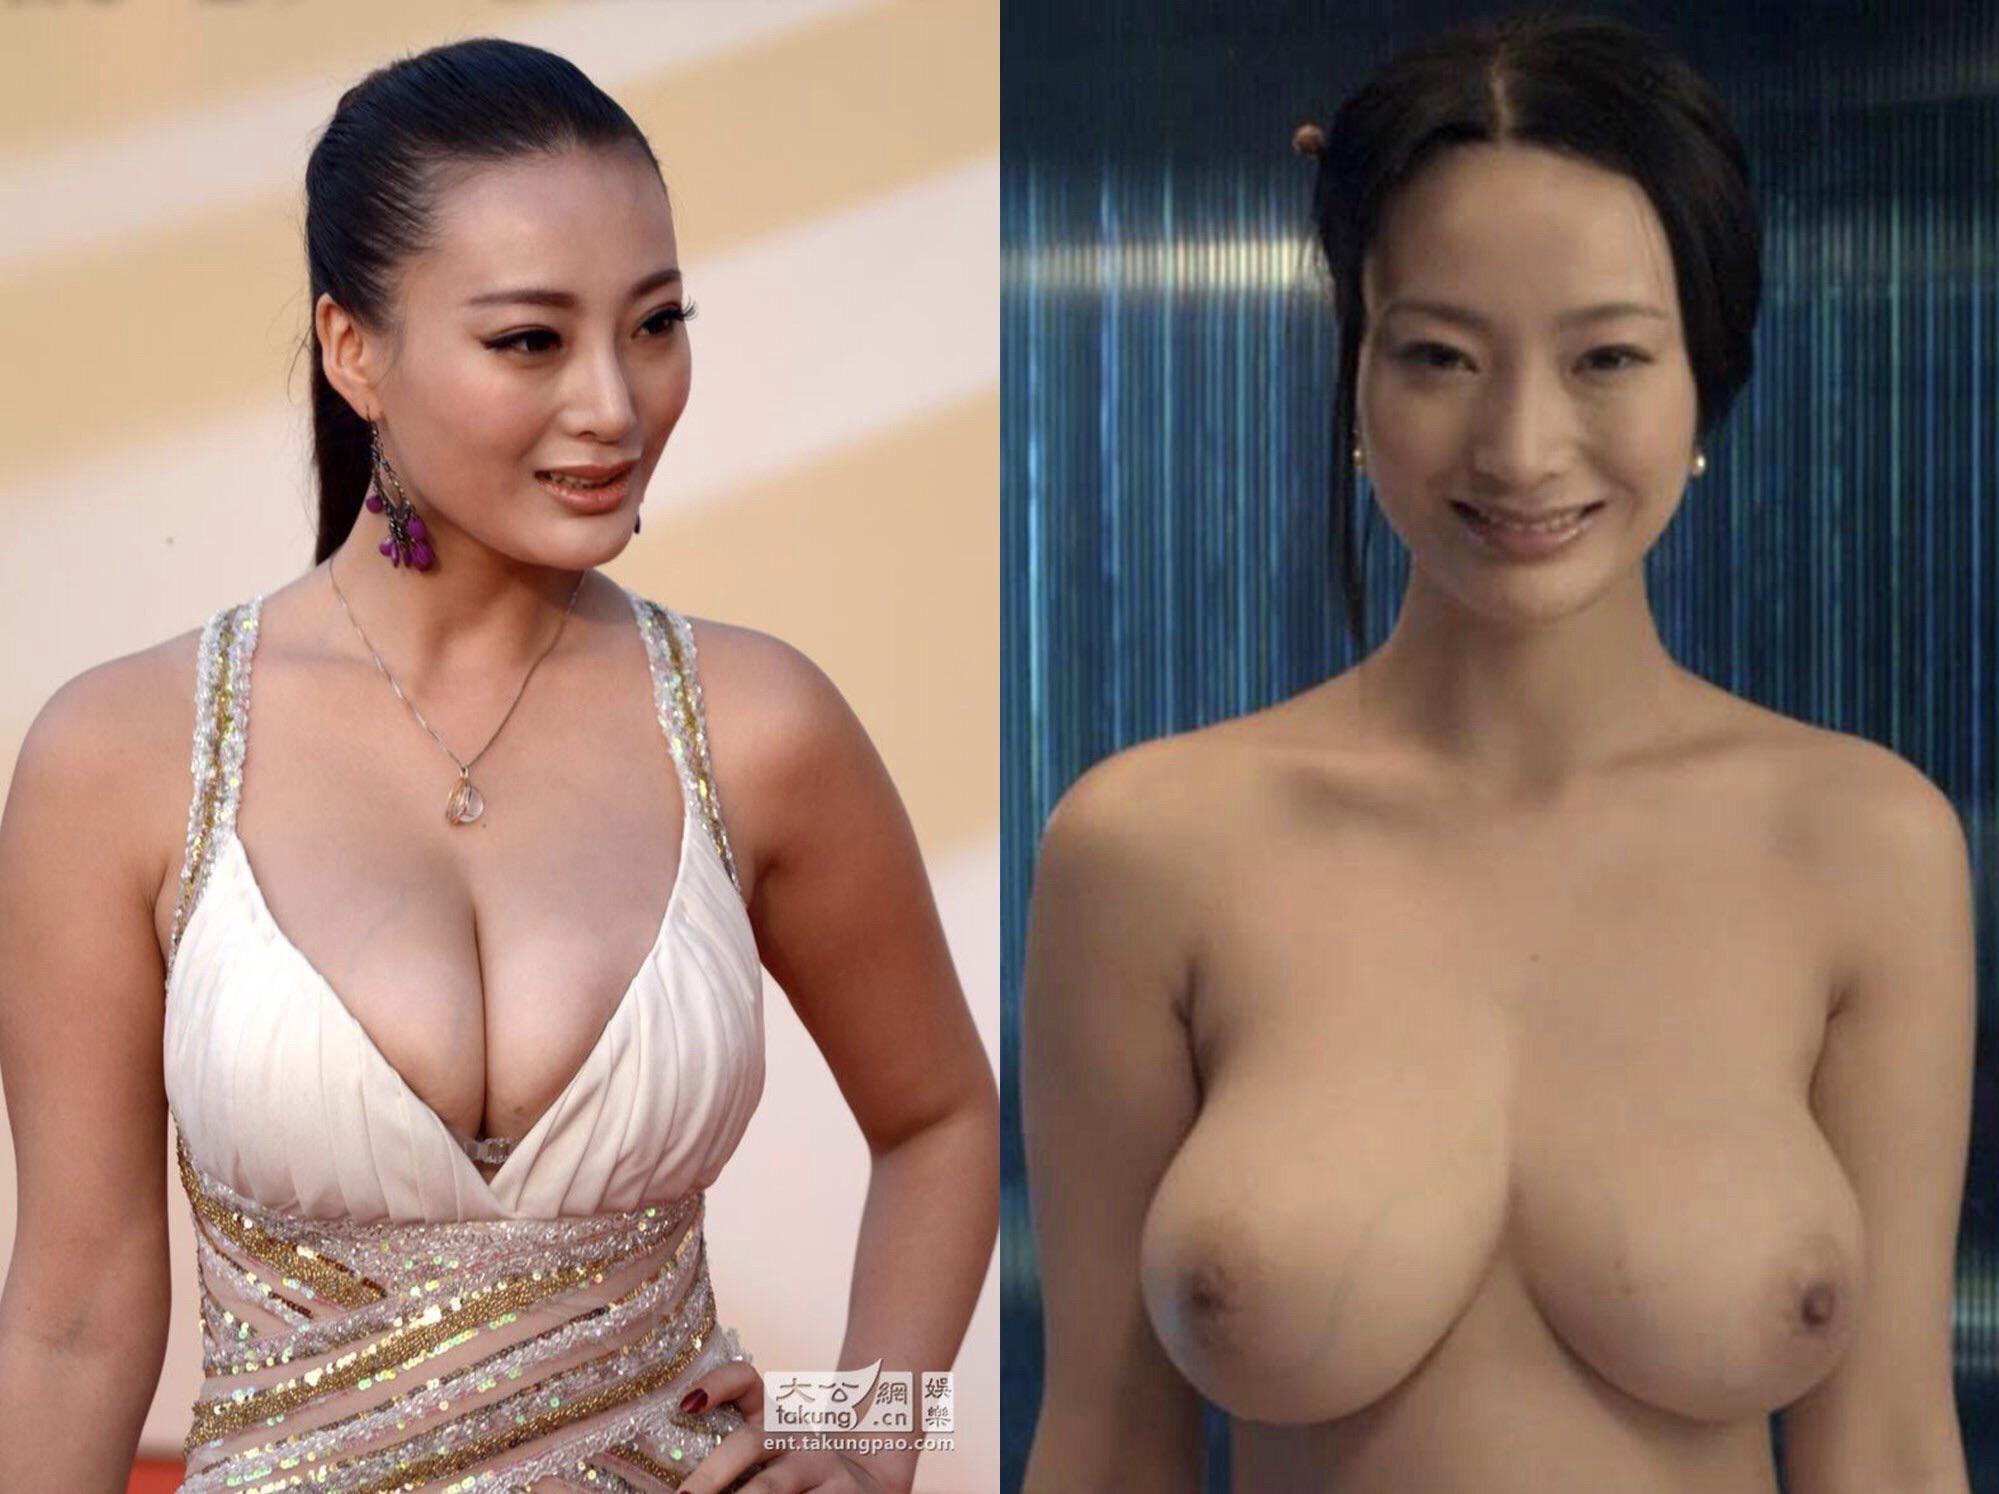 Chinese porn actresses